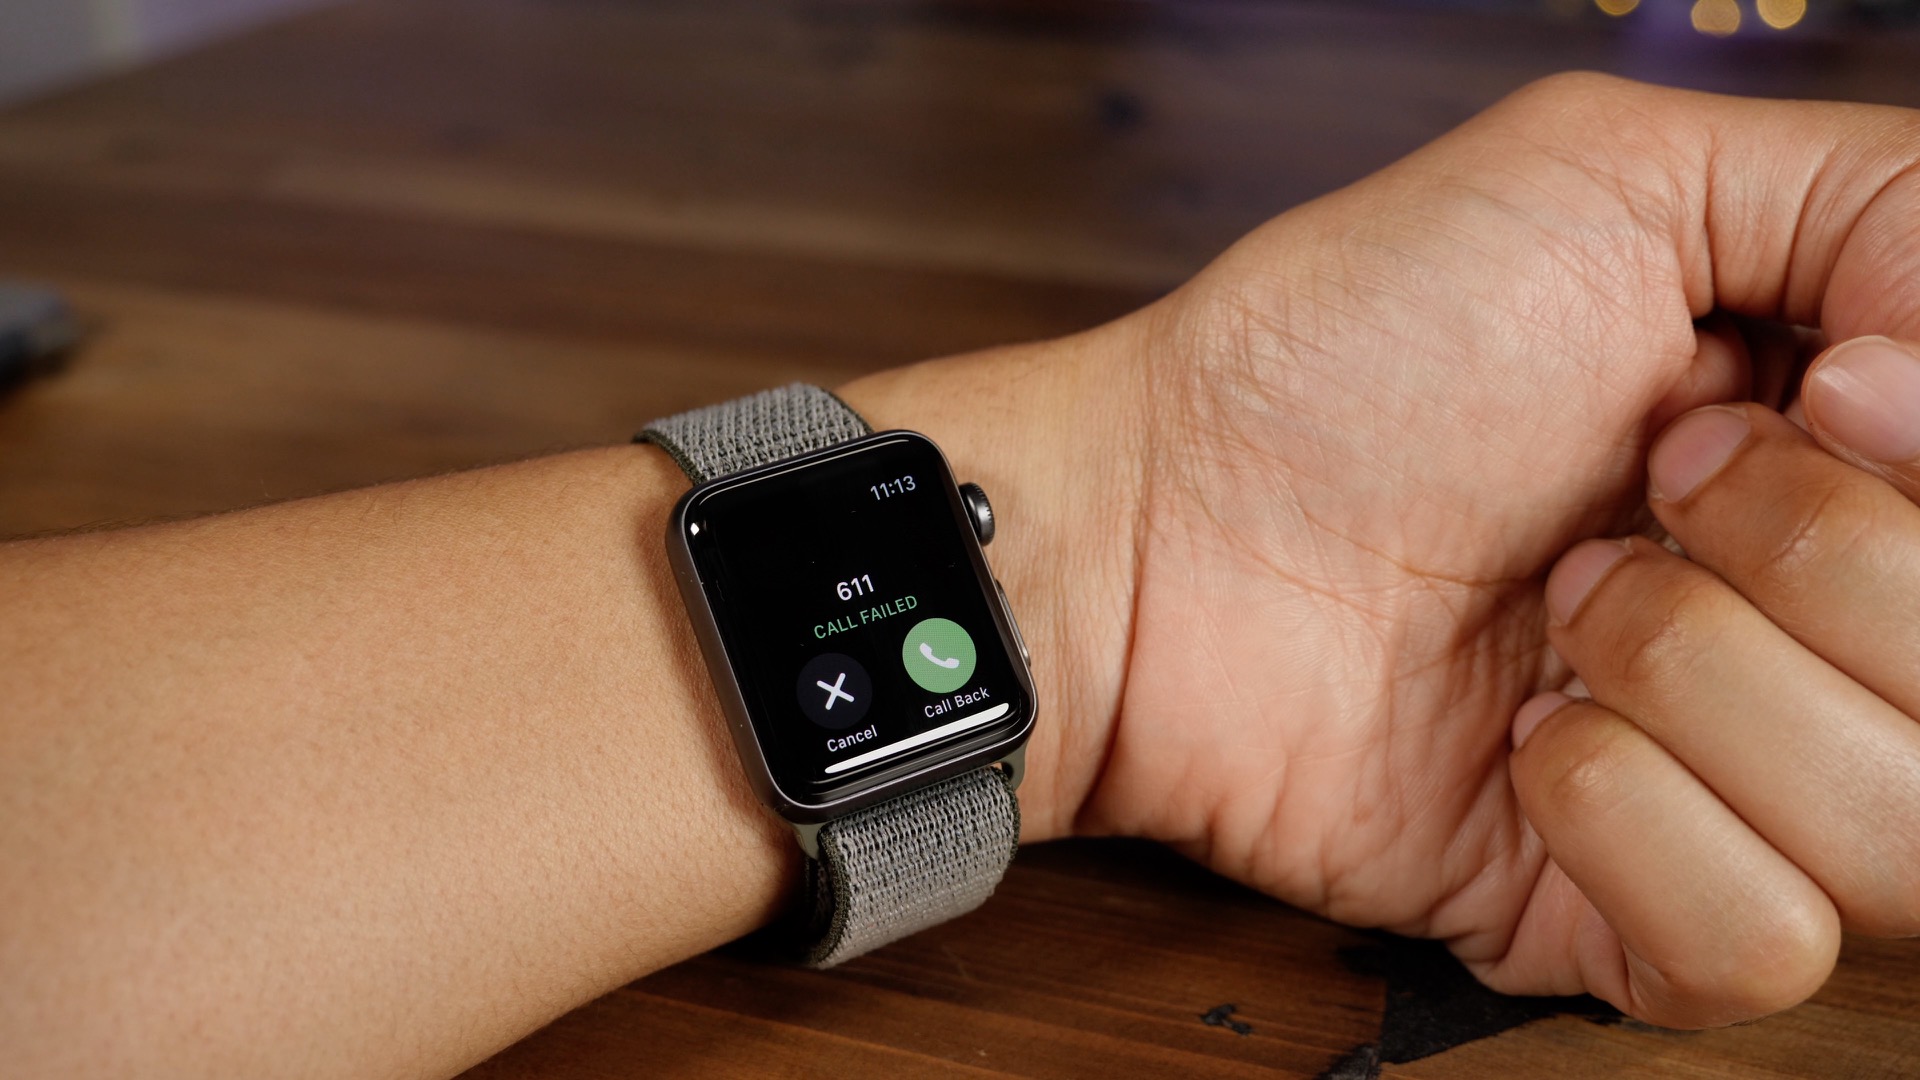 series 3 apple watch features without cellular